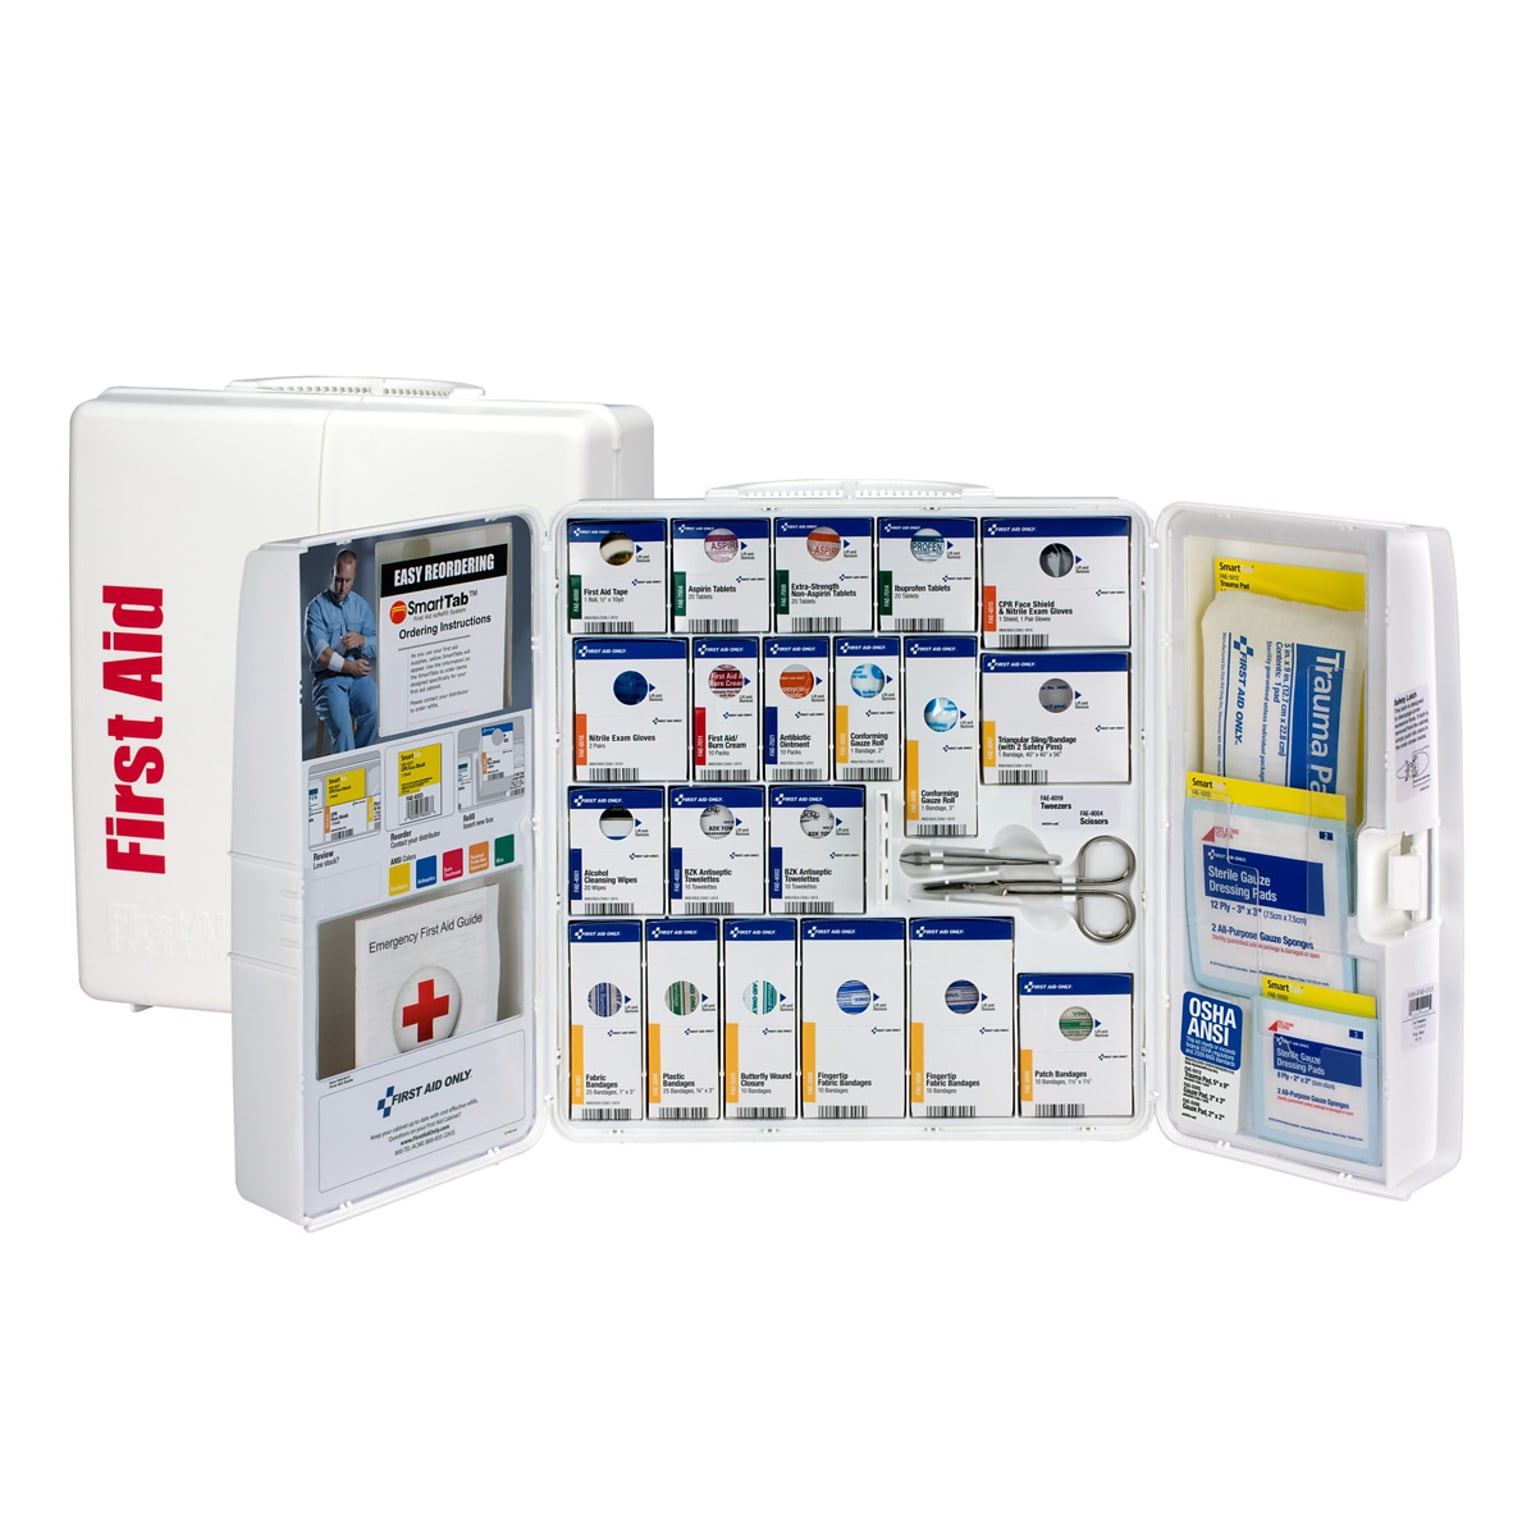 SmartCompliance Plastic First Aid Cabinet with Medication, 50 People, 245 Pieces (1000-FAE-0103)